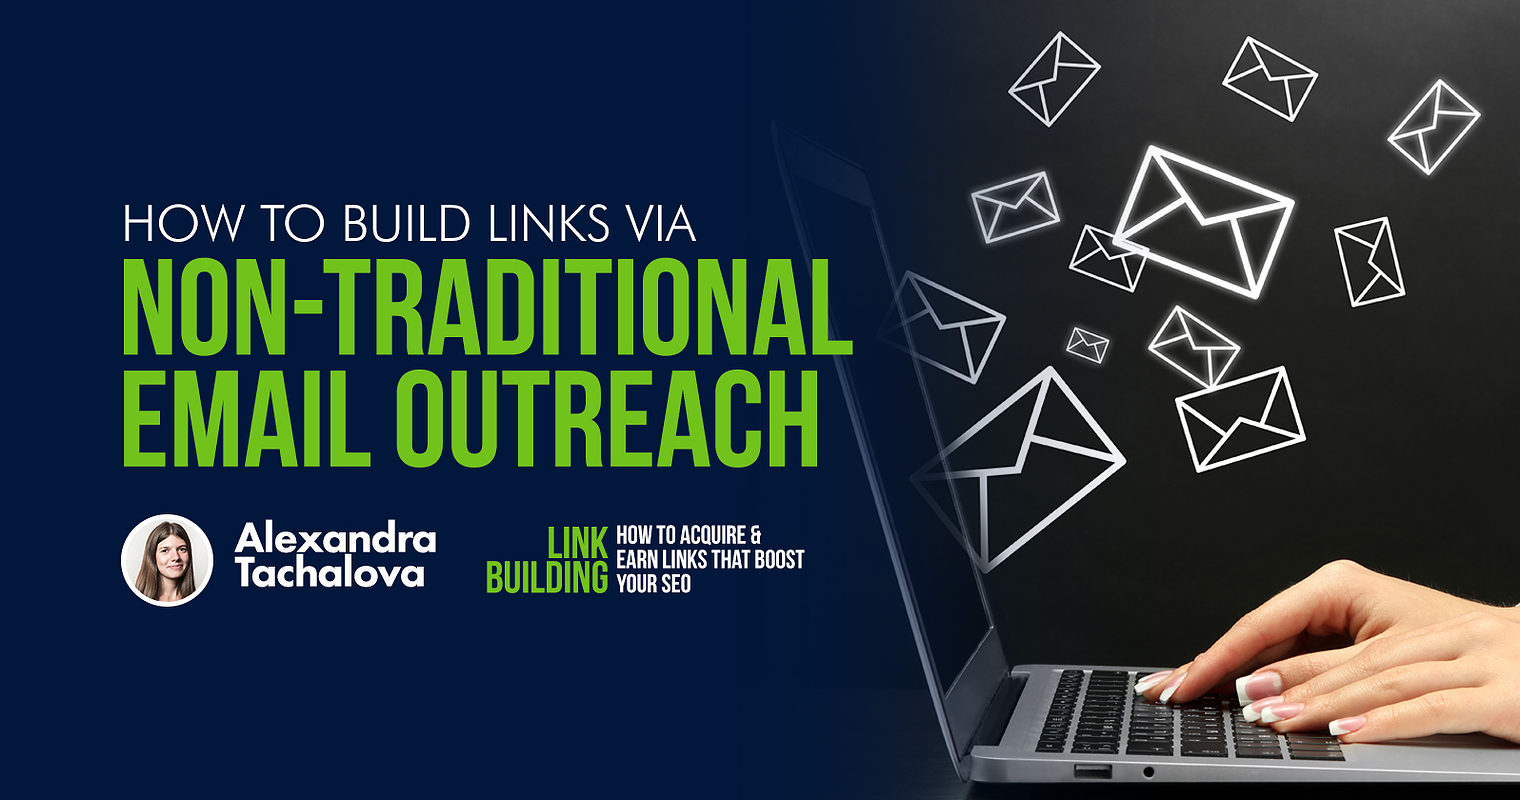 How to Build Links via Non-Traditional Email Outreach